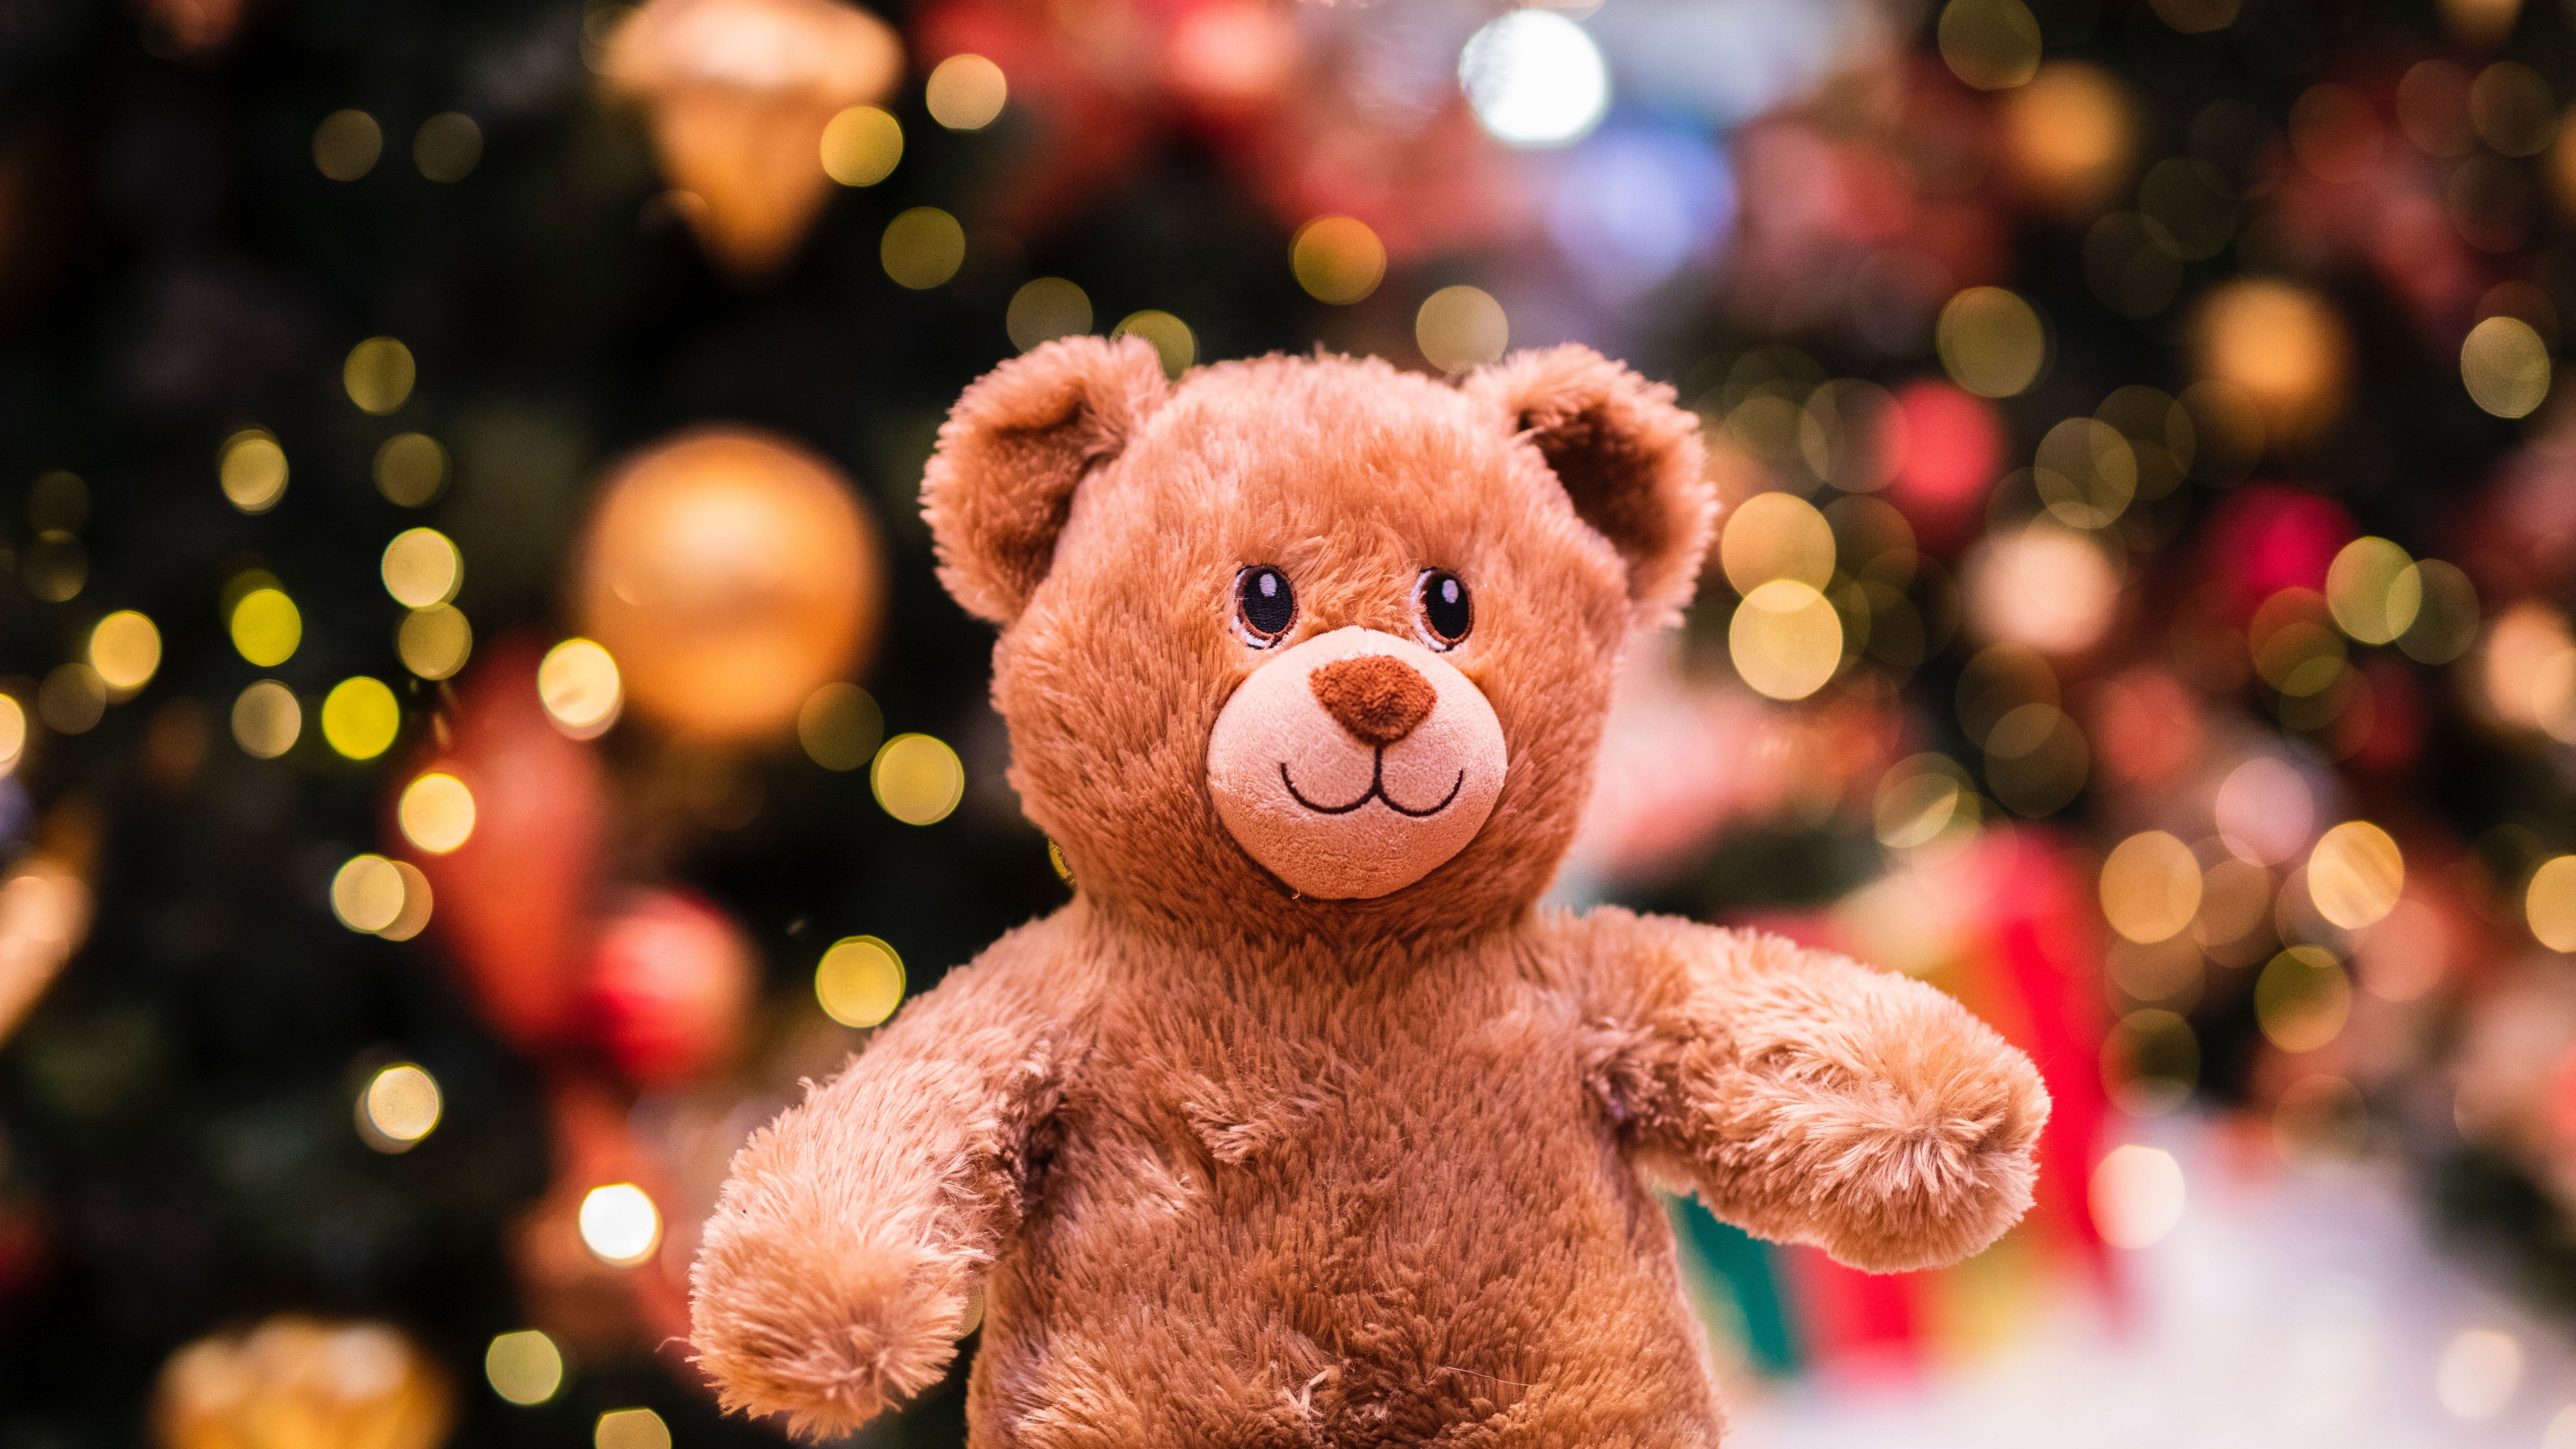 A teddy bear is standing in front of christmas lights - Teddy bear